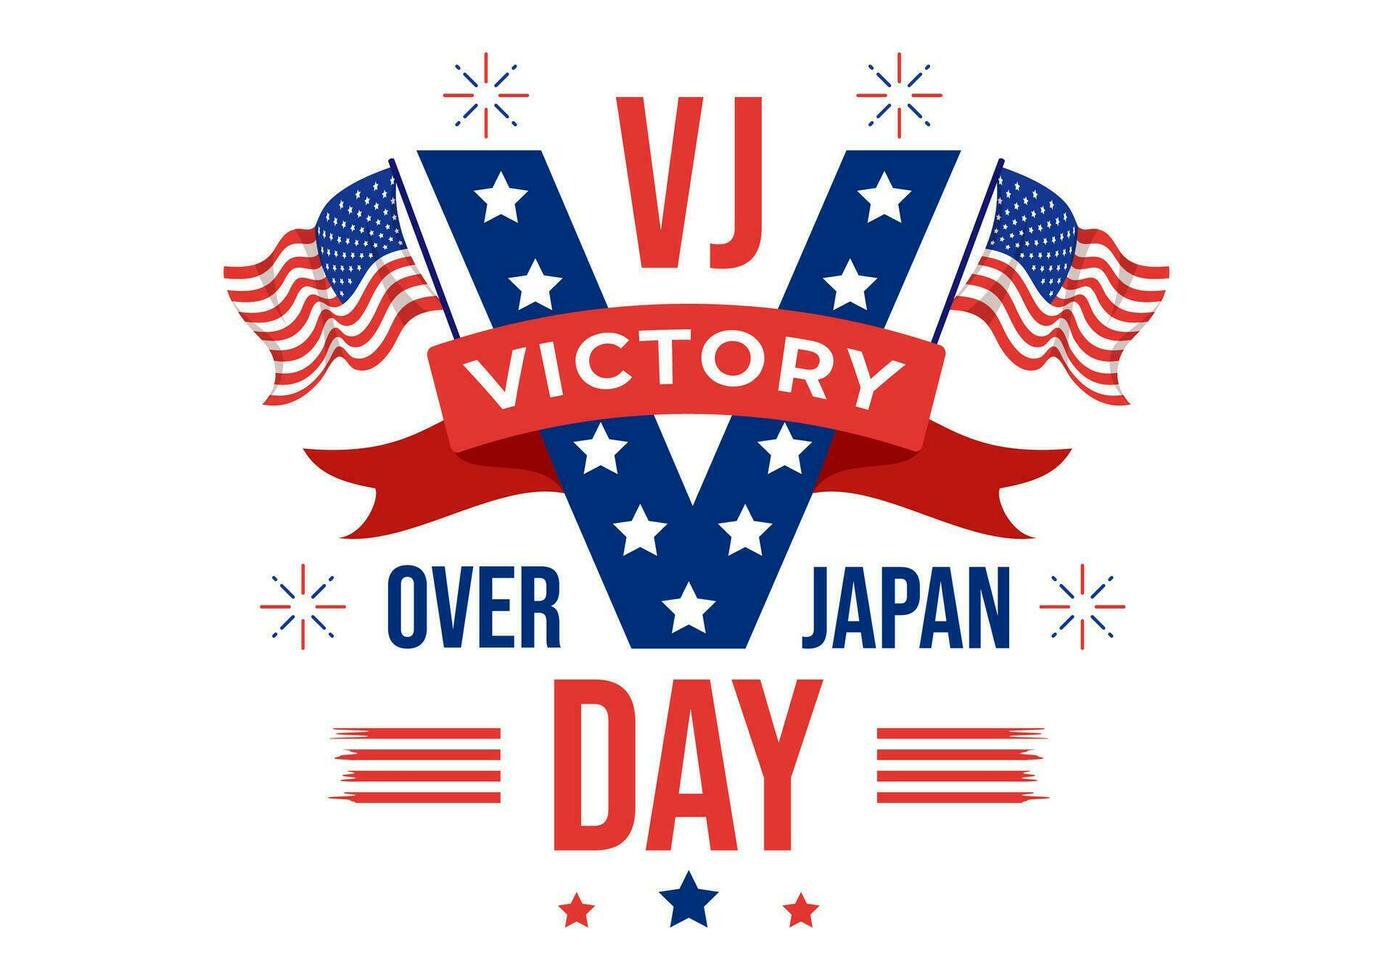 VJ Victory Over Japan Day Celebrate Vector Illustration with United State Flag Background in Flat Cartoon Hand Drawn for Landing Page Templates